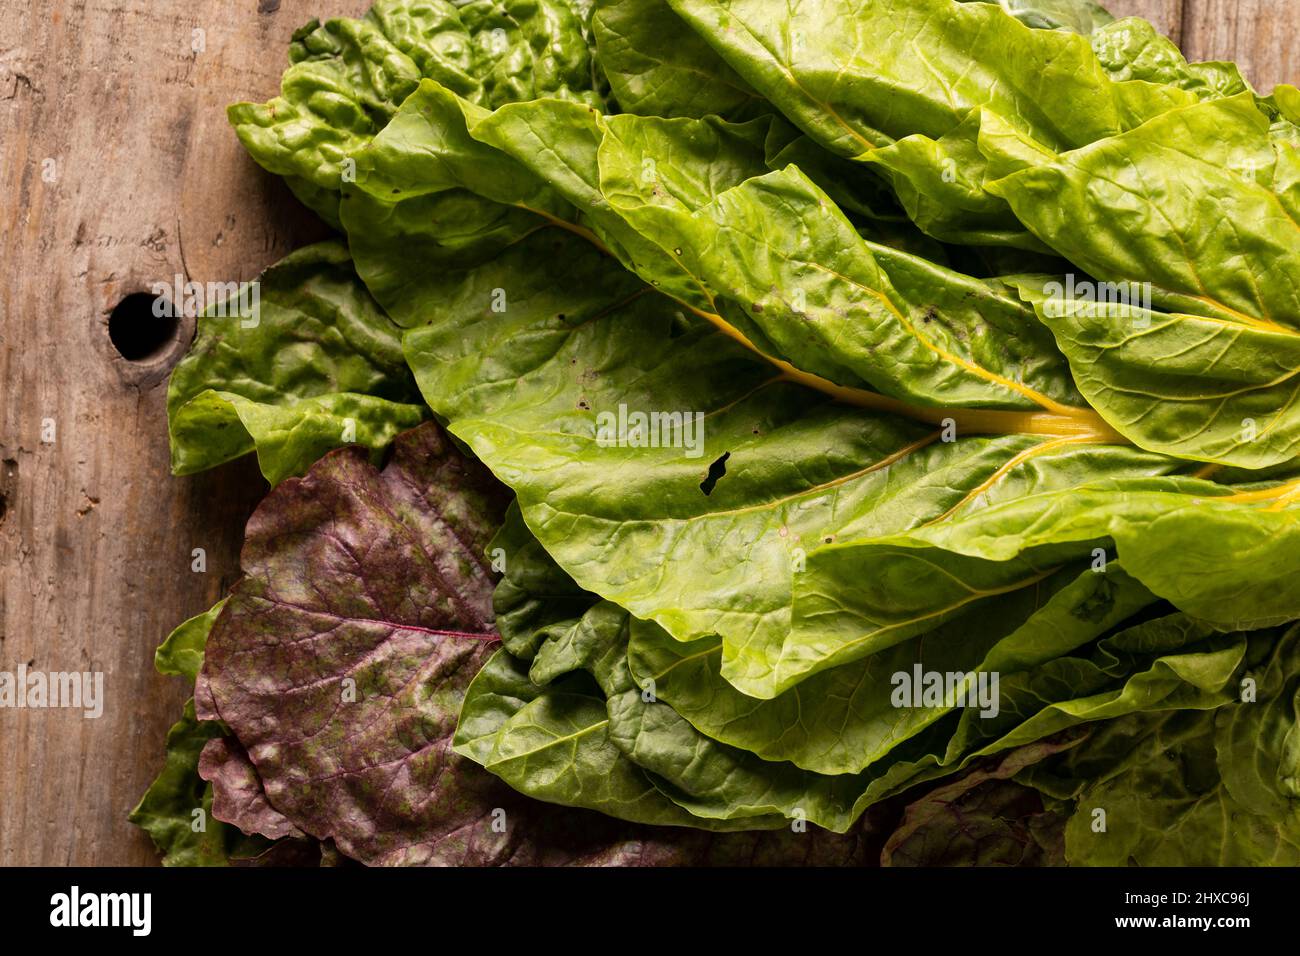 Directly above close-up shot of fresh leaf vegetable on wooden table Stock Photo